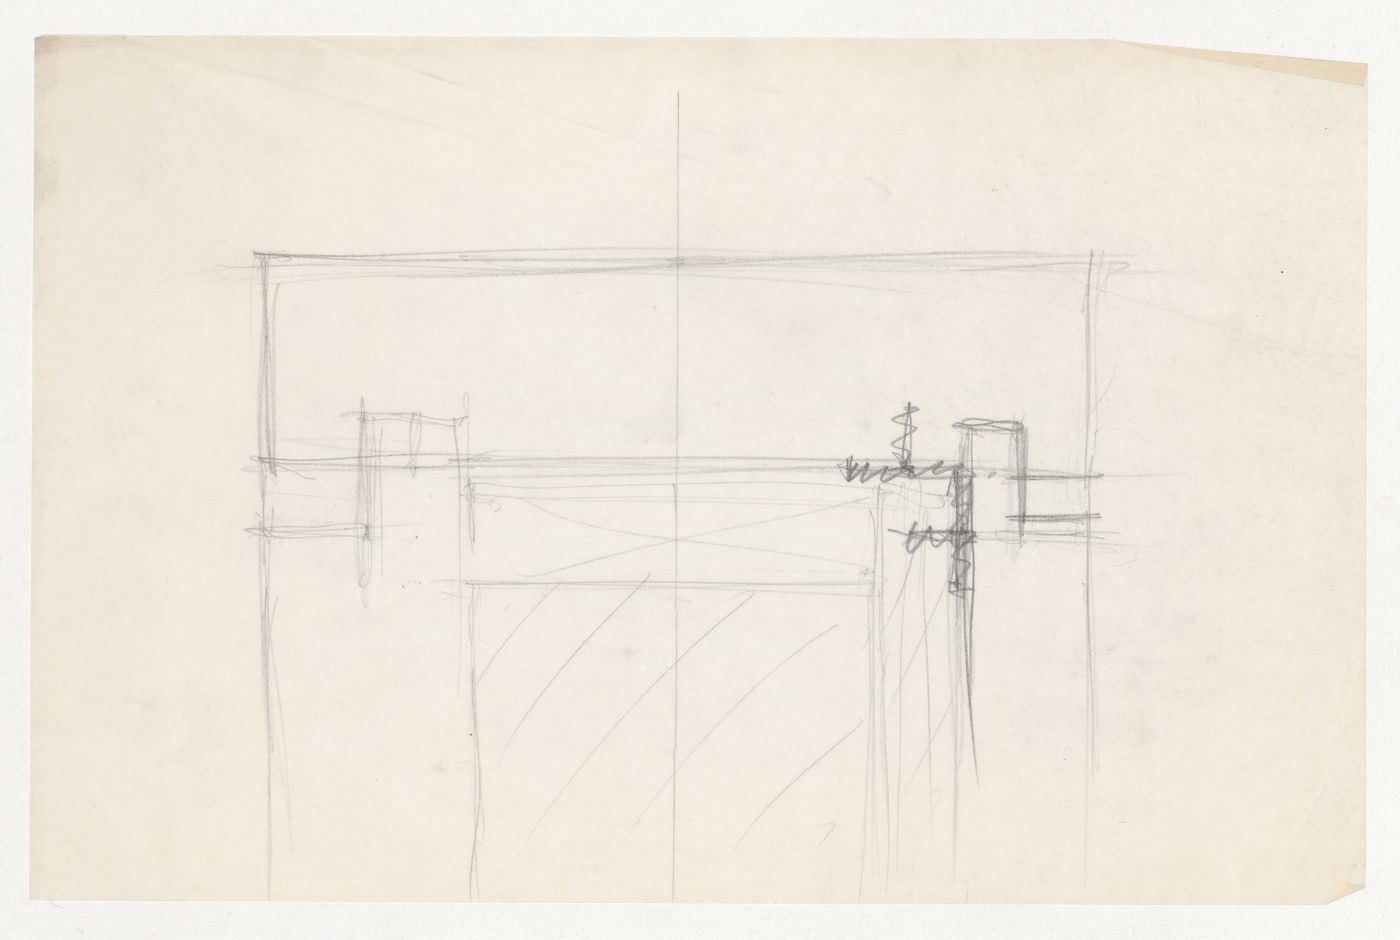 Sketch sectional detail for the Metallurgy Building, Illinois Institute of Technology, Chicago